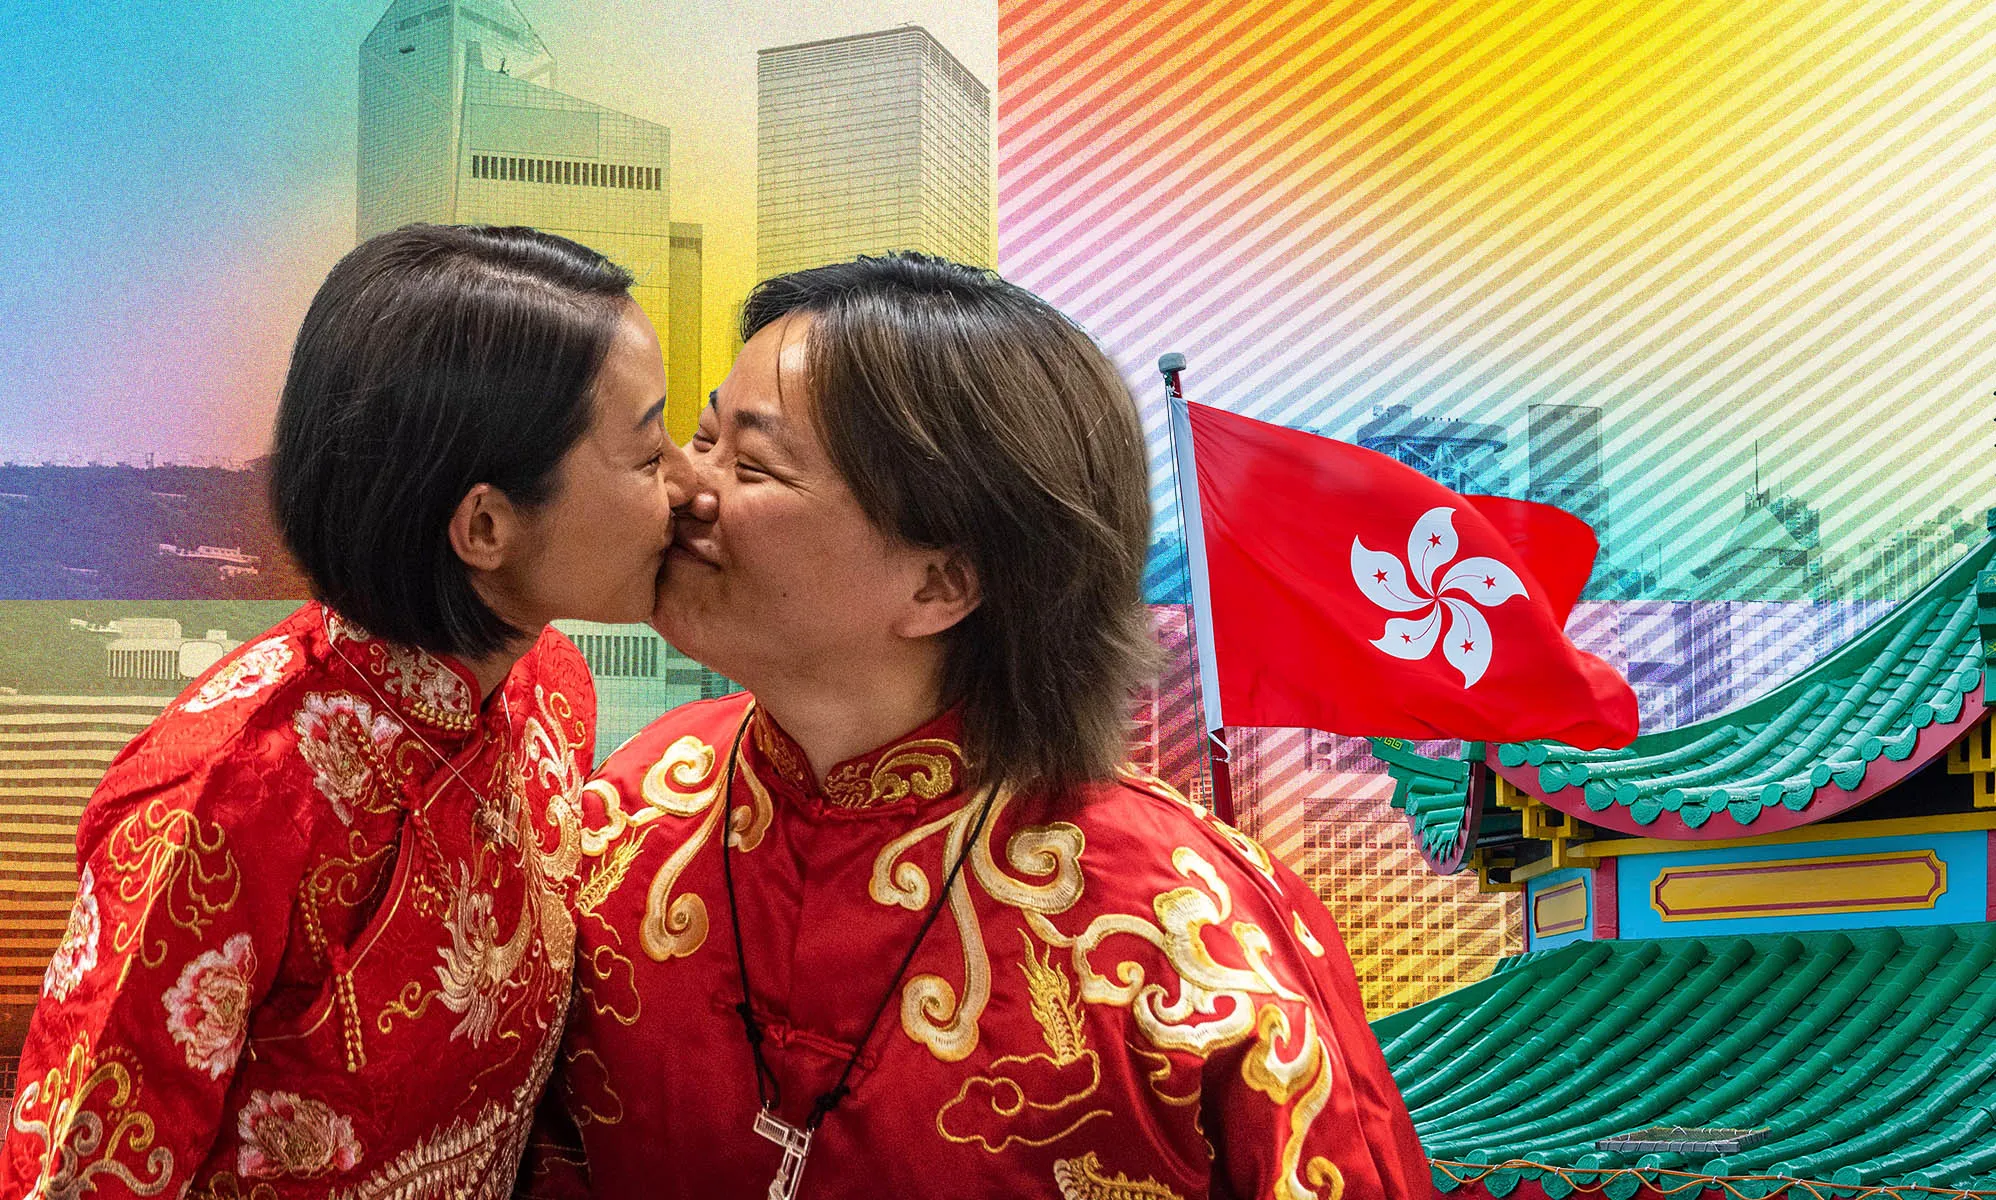 LGBTQ couple in Hong Kong forced to hide relationship